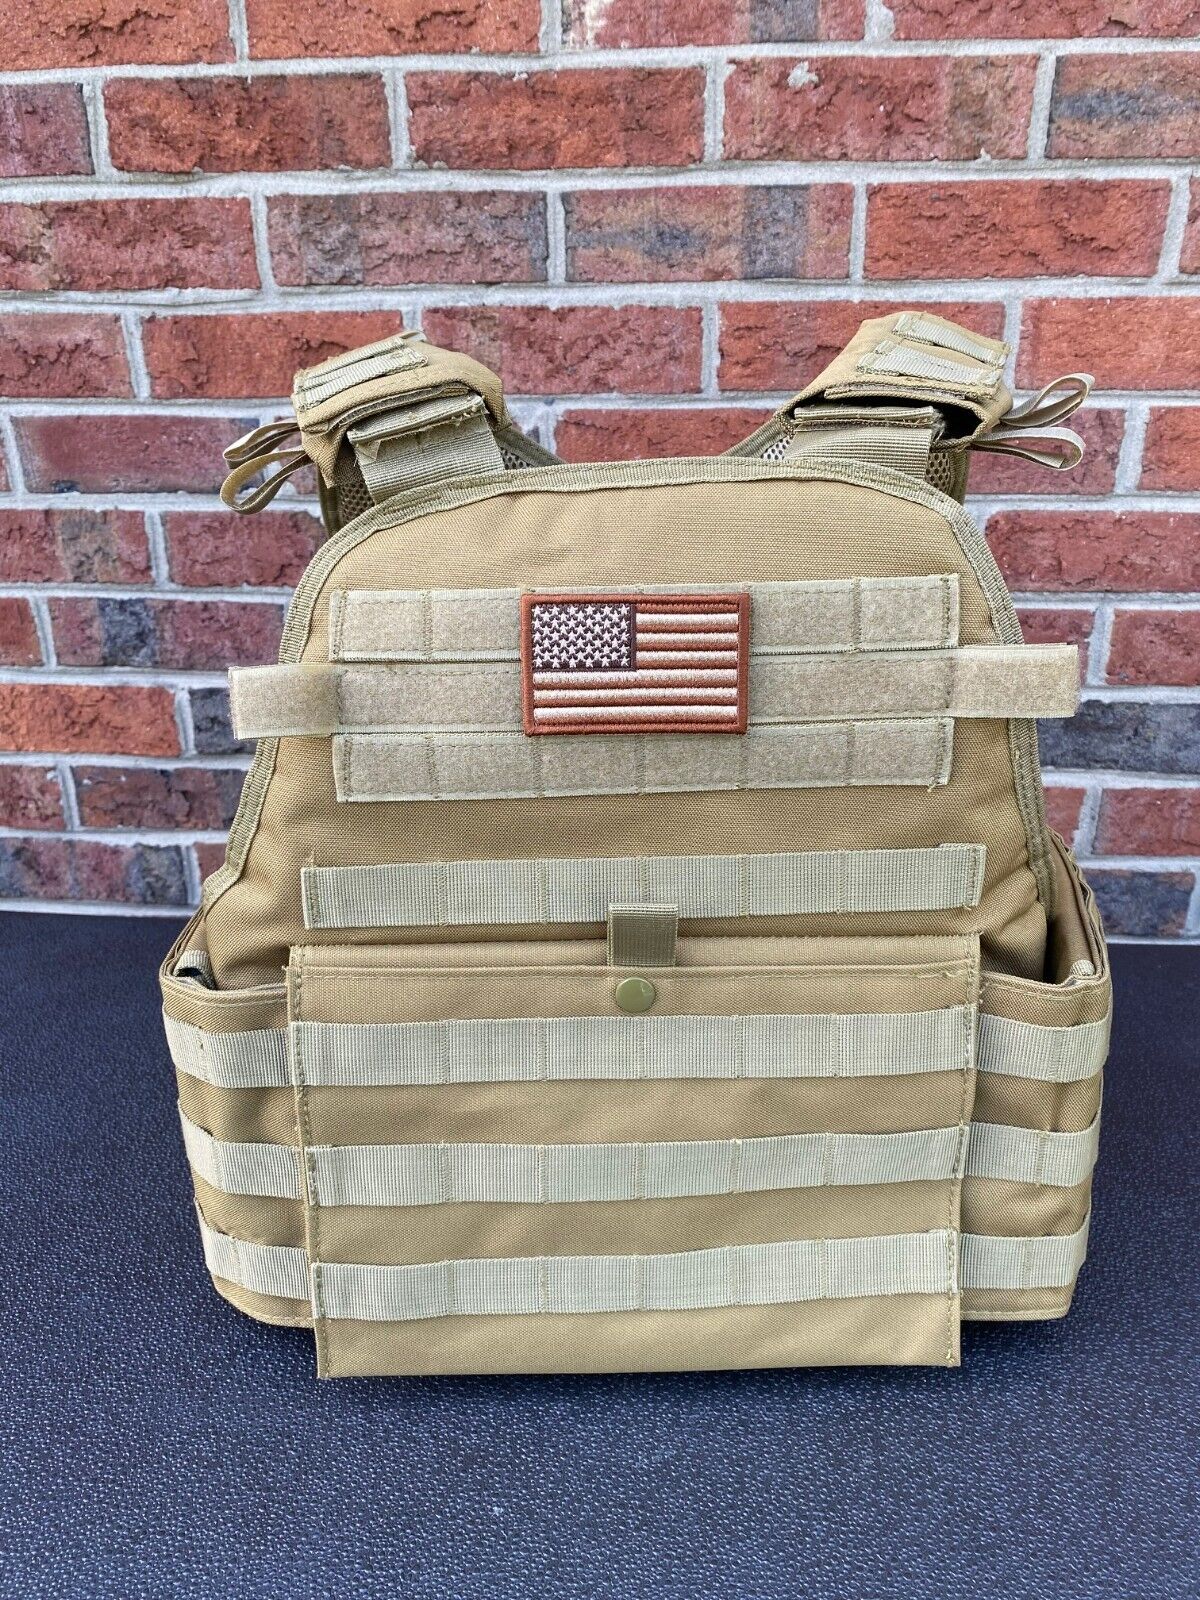 Tactical Vest COYOTE FDE Tan Plate Carrier Military Matches Multicam- Adjustable